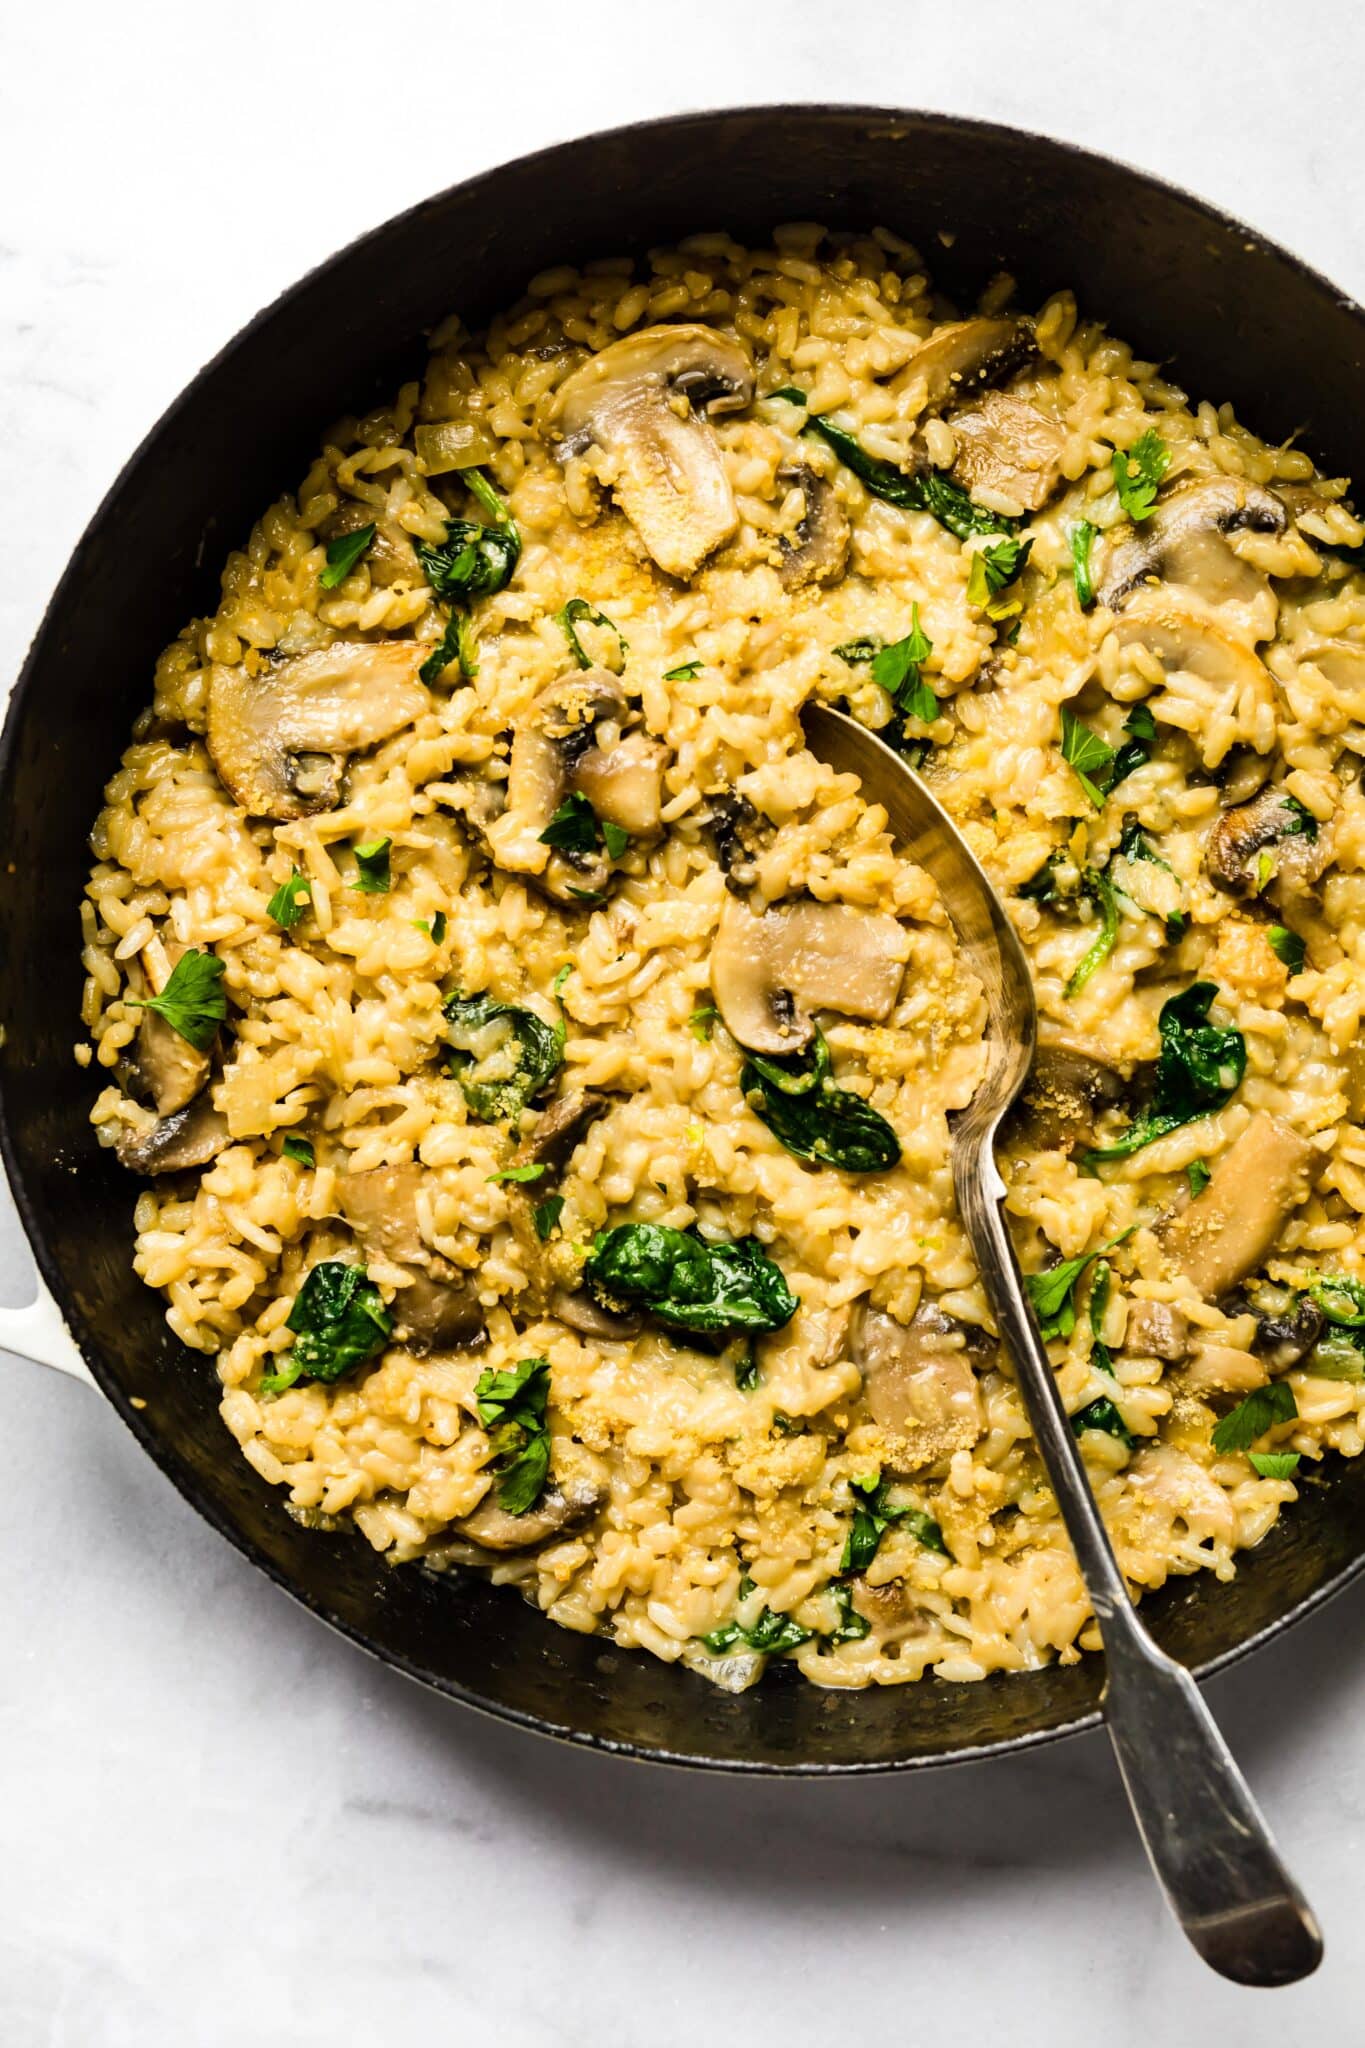 Overhead photo of a spoon digging into a pan of creamy mushroom risotto.